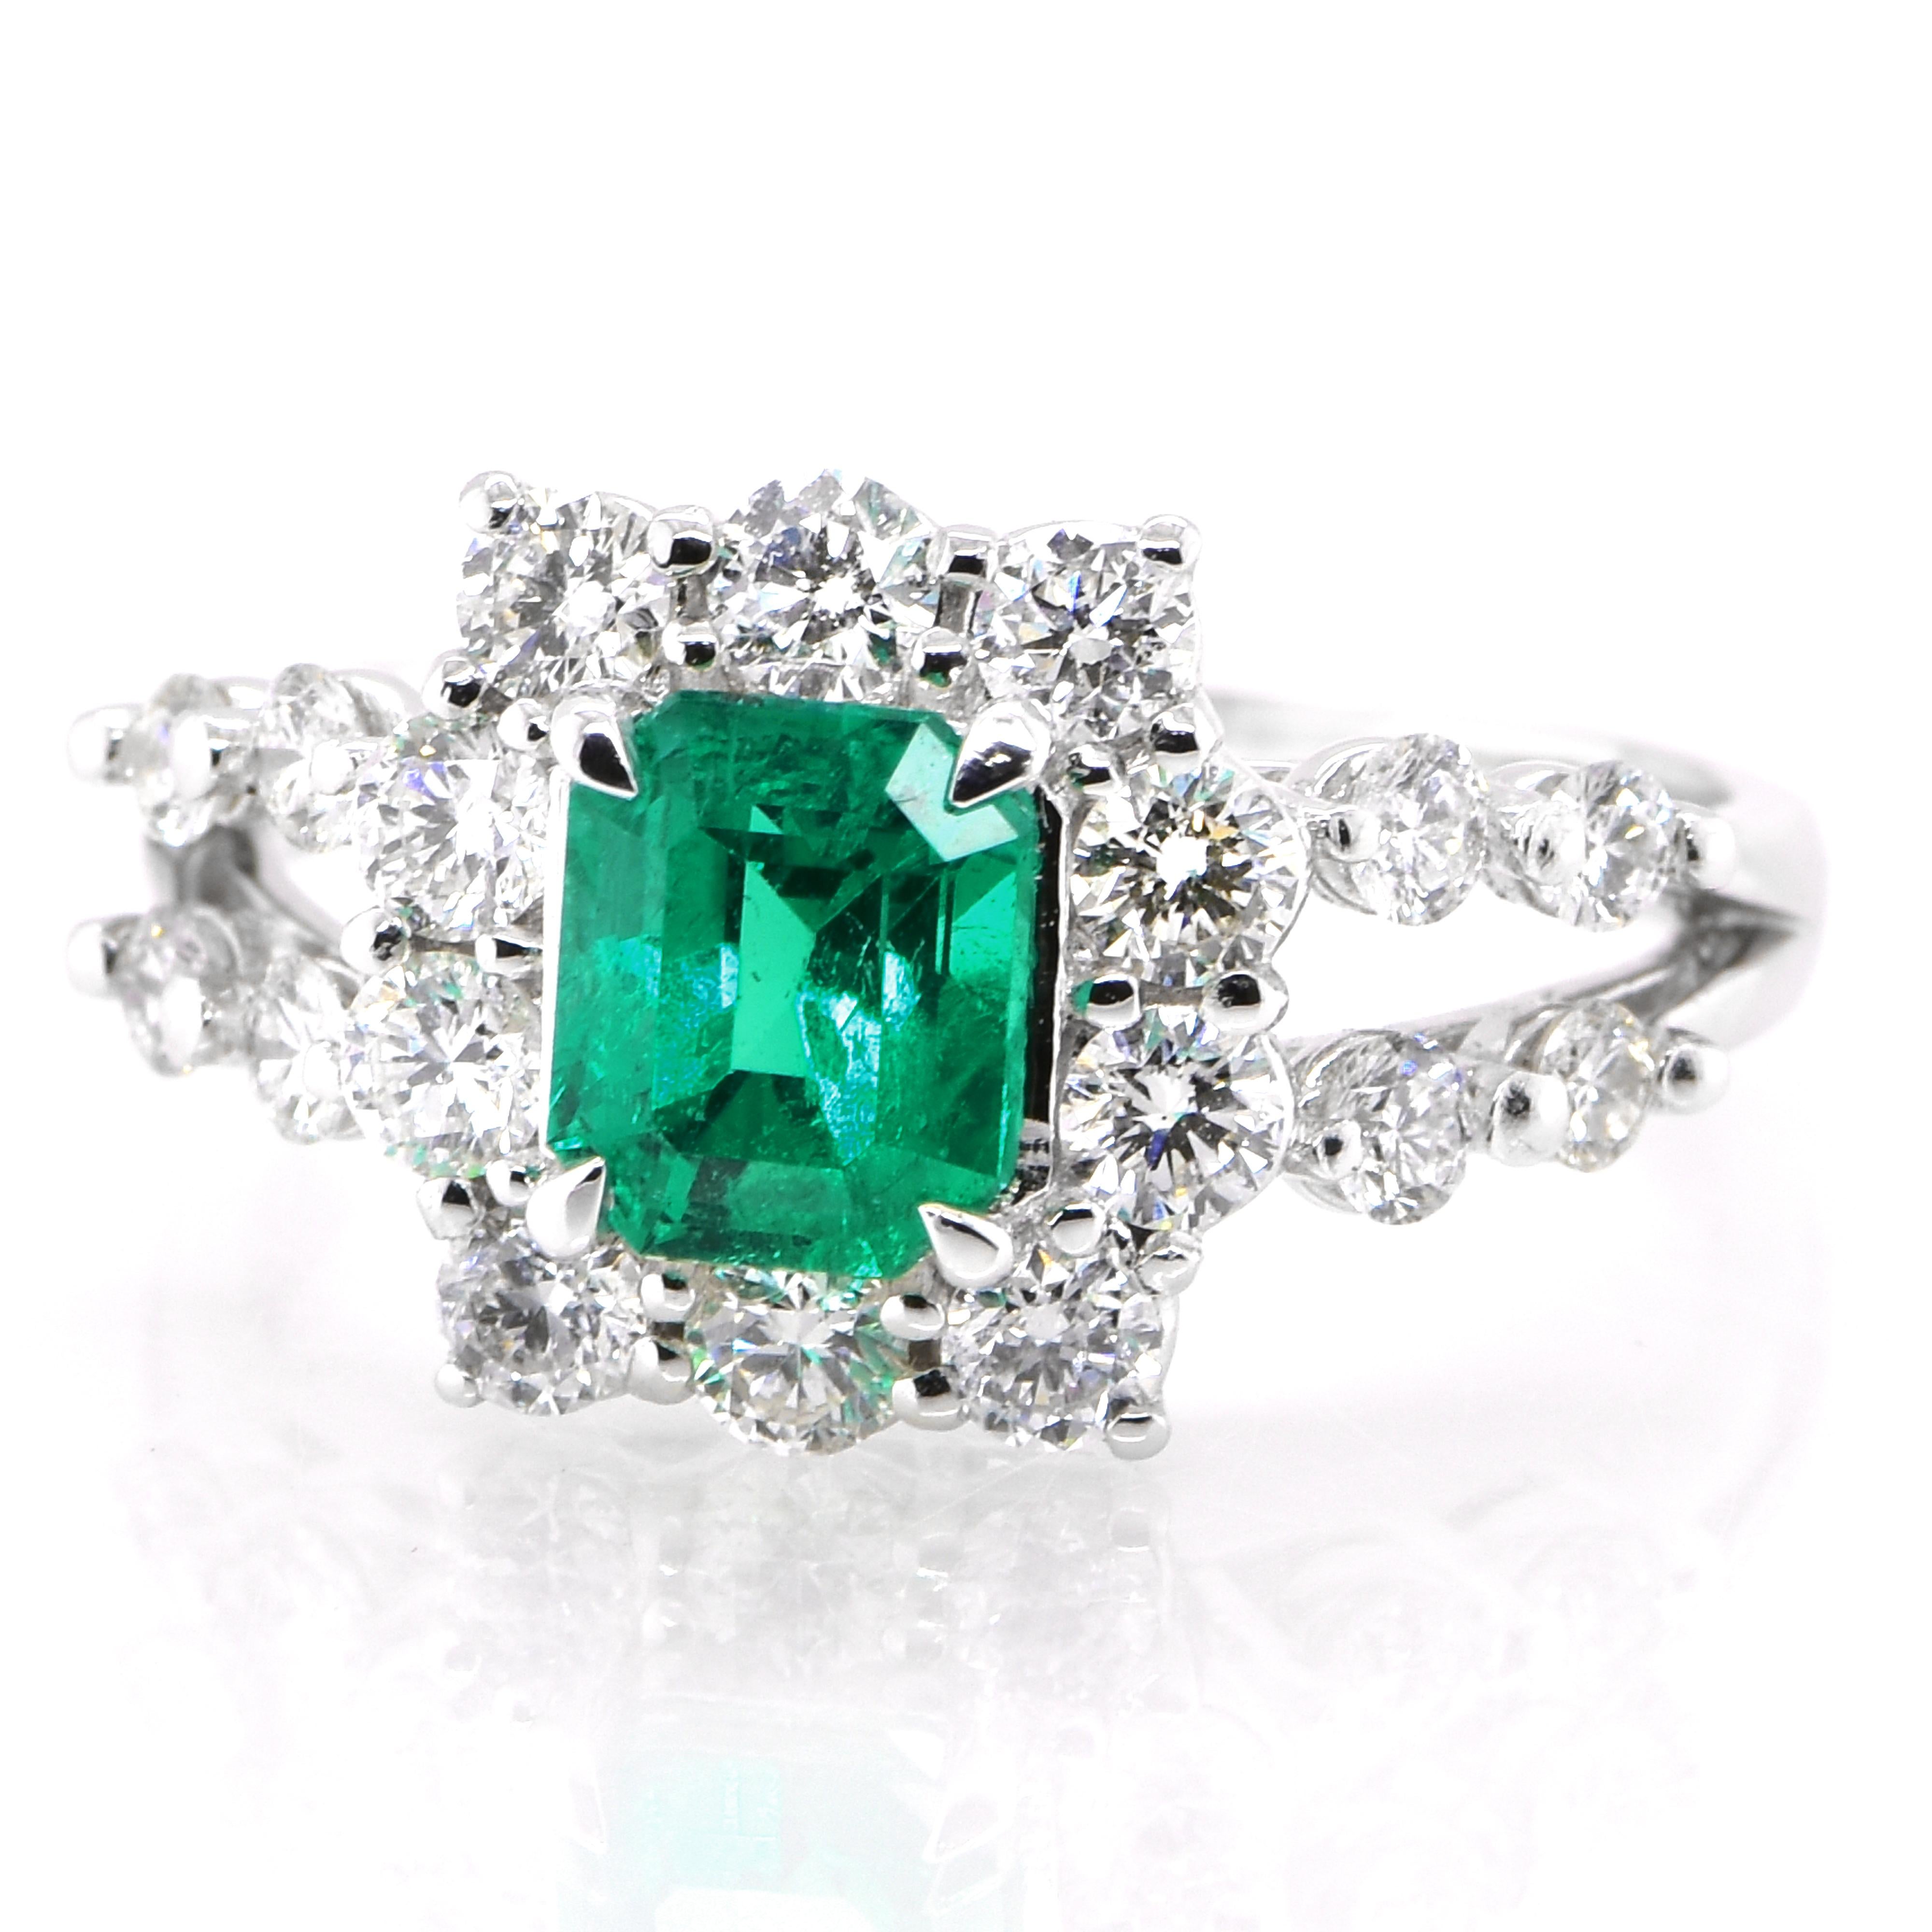 A stunning ring featuring a 1.00 Carat Natural Emerald and 0.91 Carats of Diamond Accents set in Platinum. People have admired emerald’s green for thousands of years. Emeralds have always been associated with the lushest landscapes and the richest